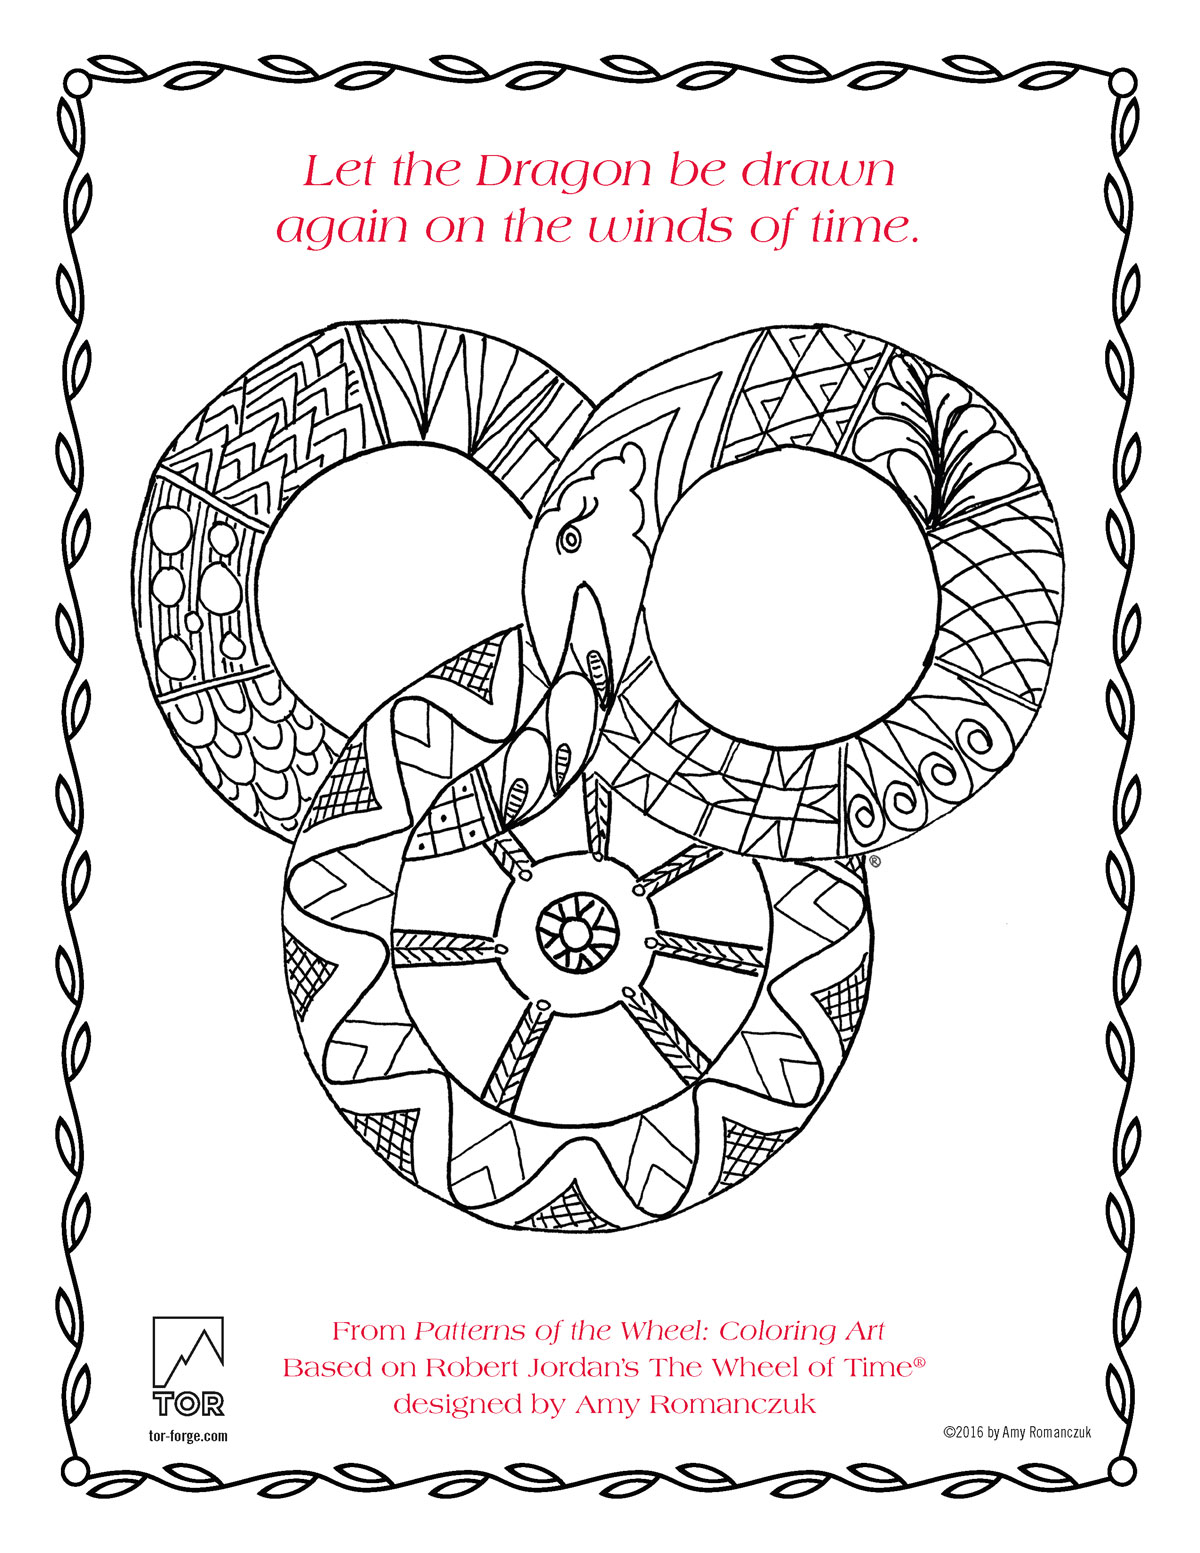 Patterns of the Wheel coloring art page